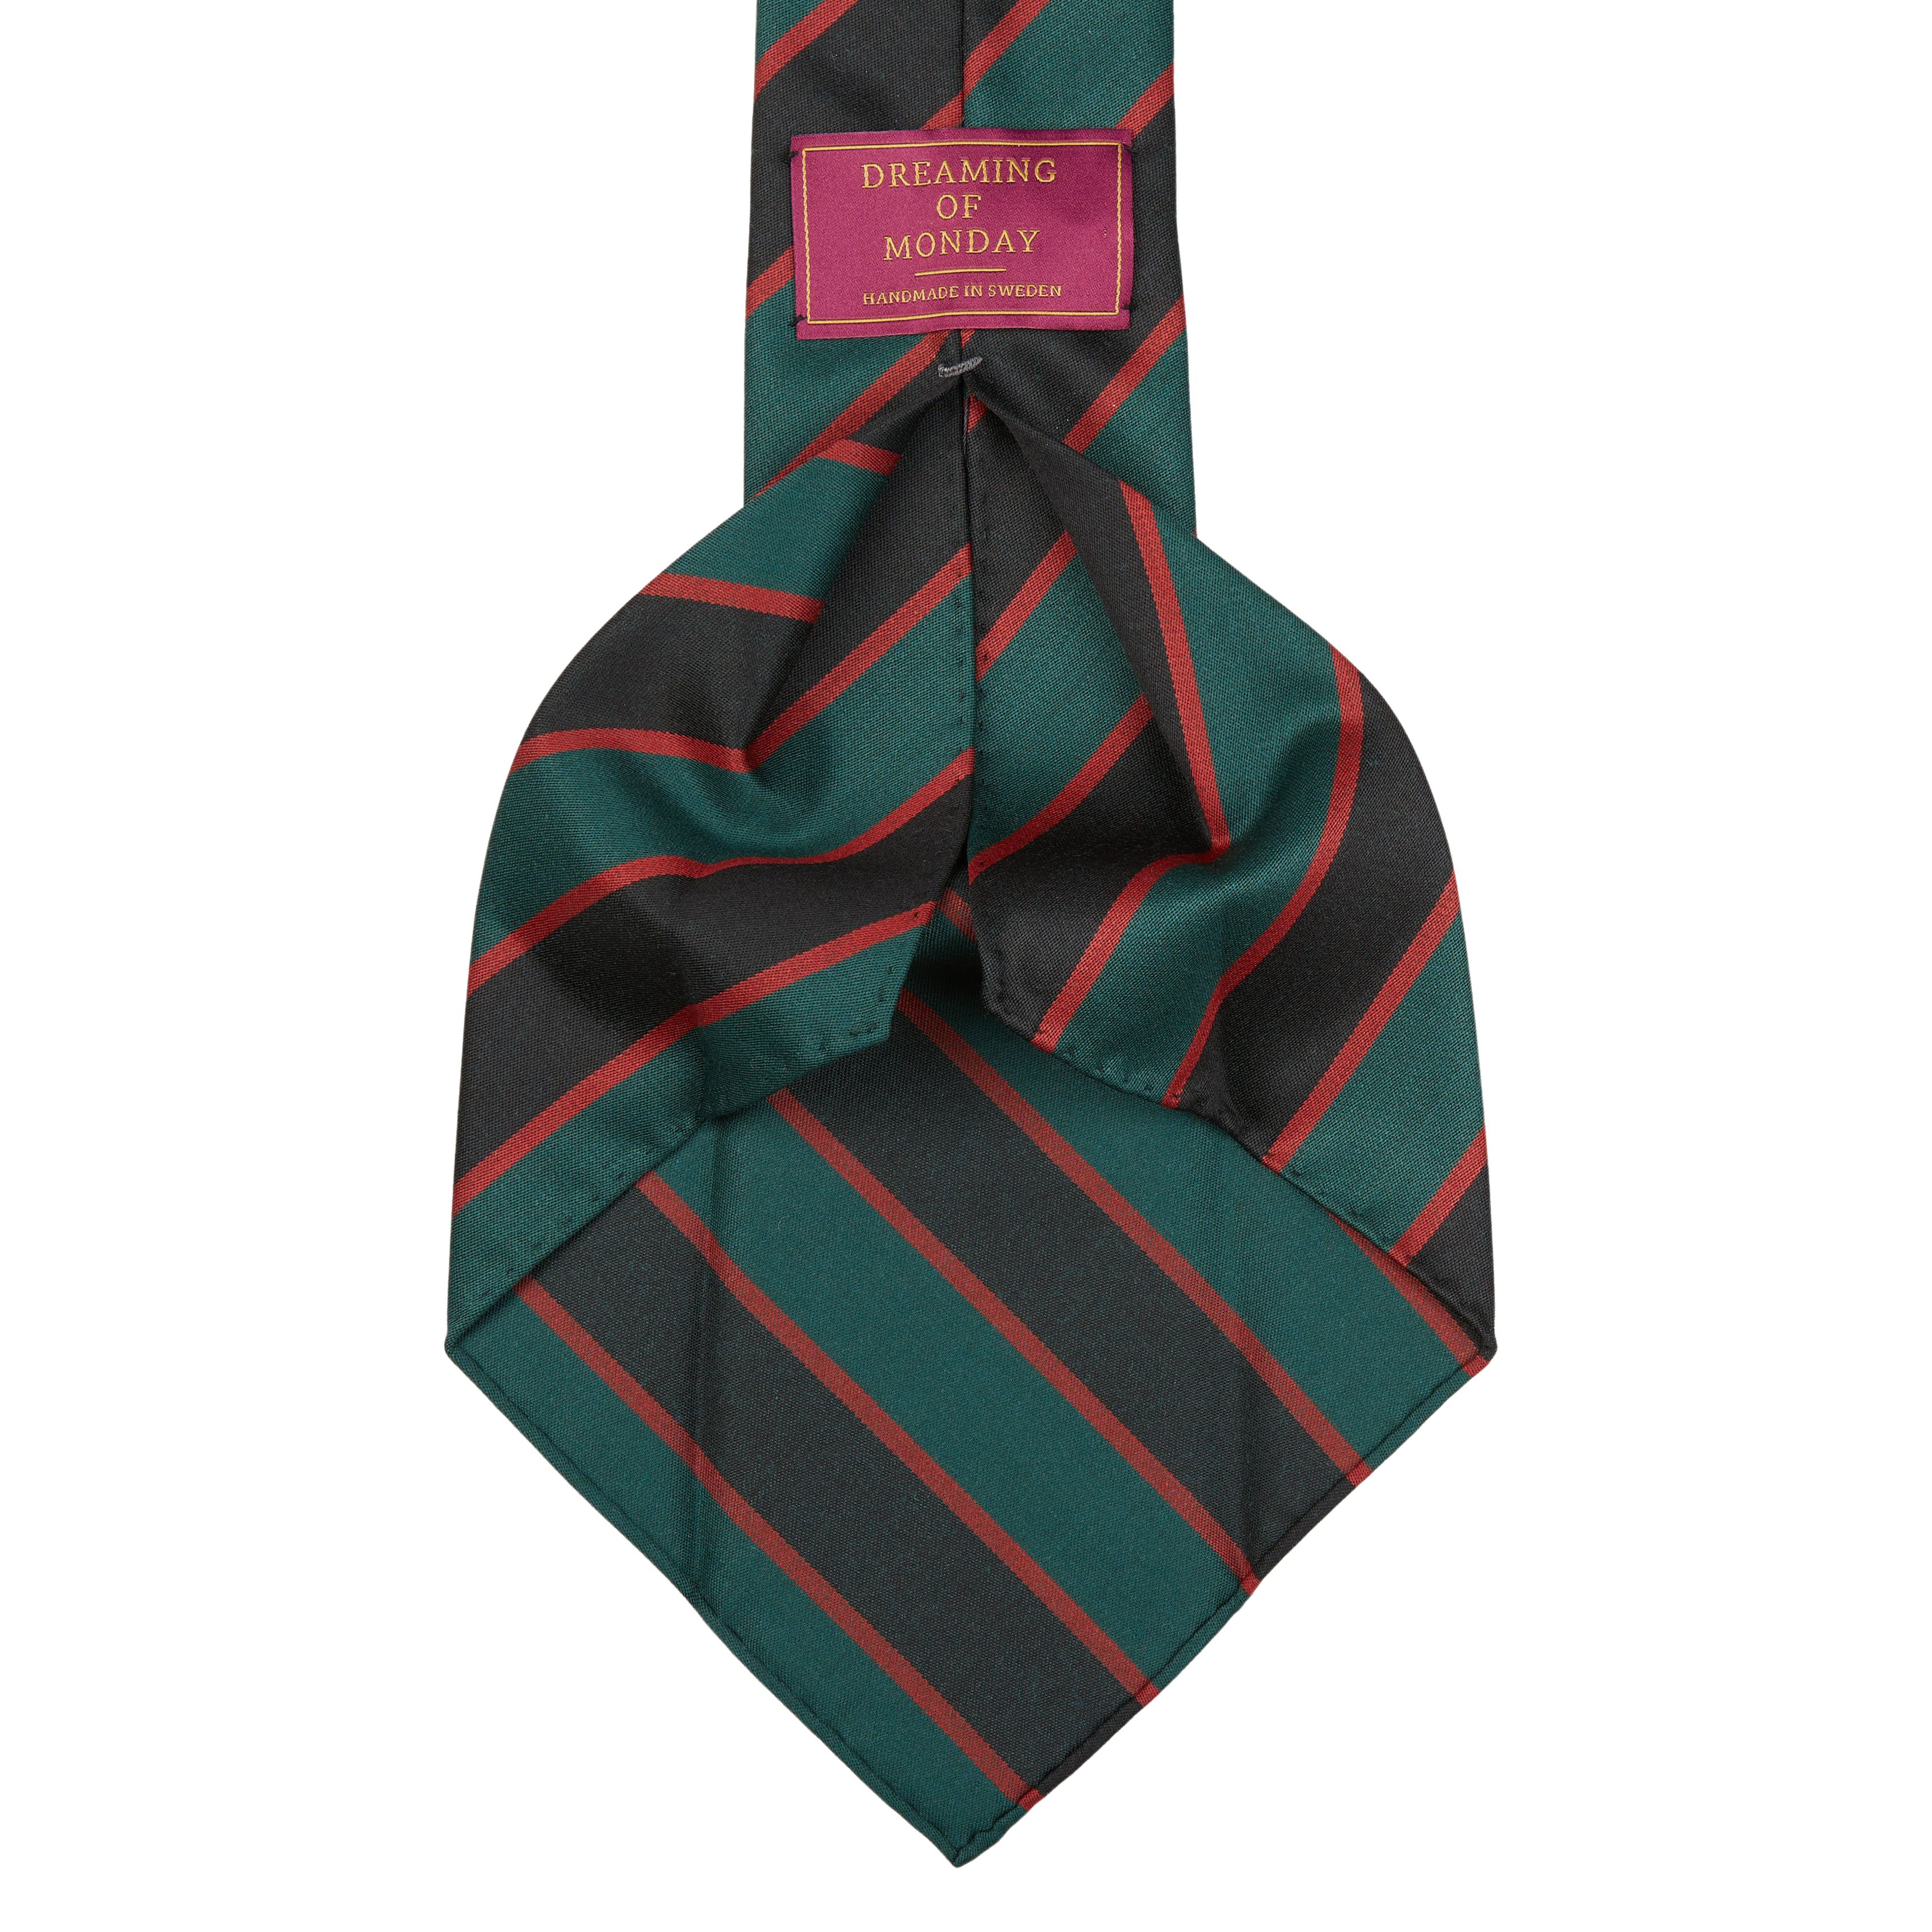 A skinny neck tie with a striped pattern in shades of green and red, handmade from a lightweight wool mix. The Green Black Regimental 7-Fold Wool Tie by Dreaming Of Monday.